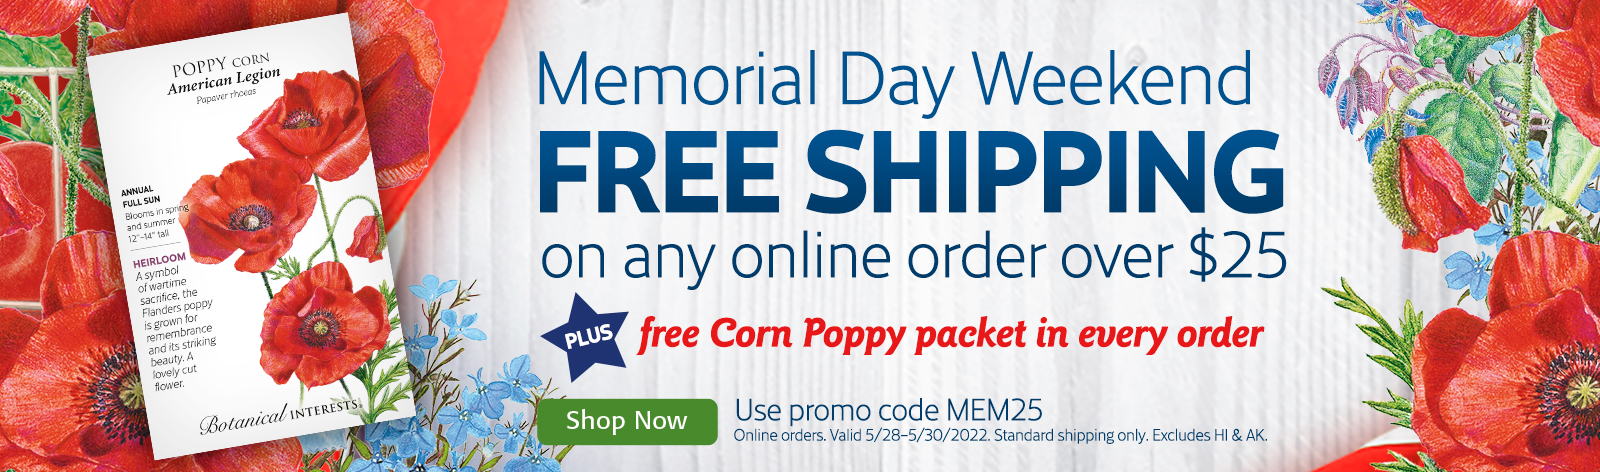 memorial day free shipping over $25